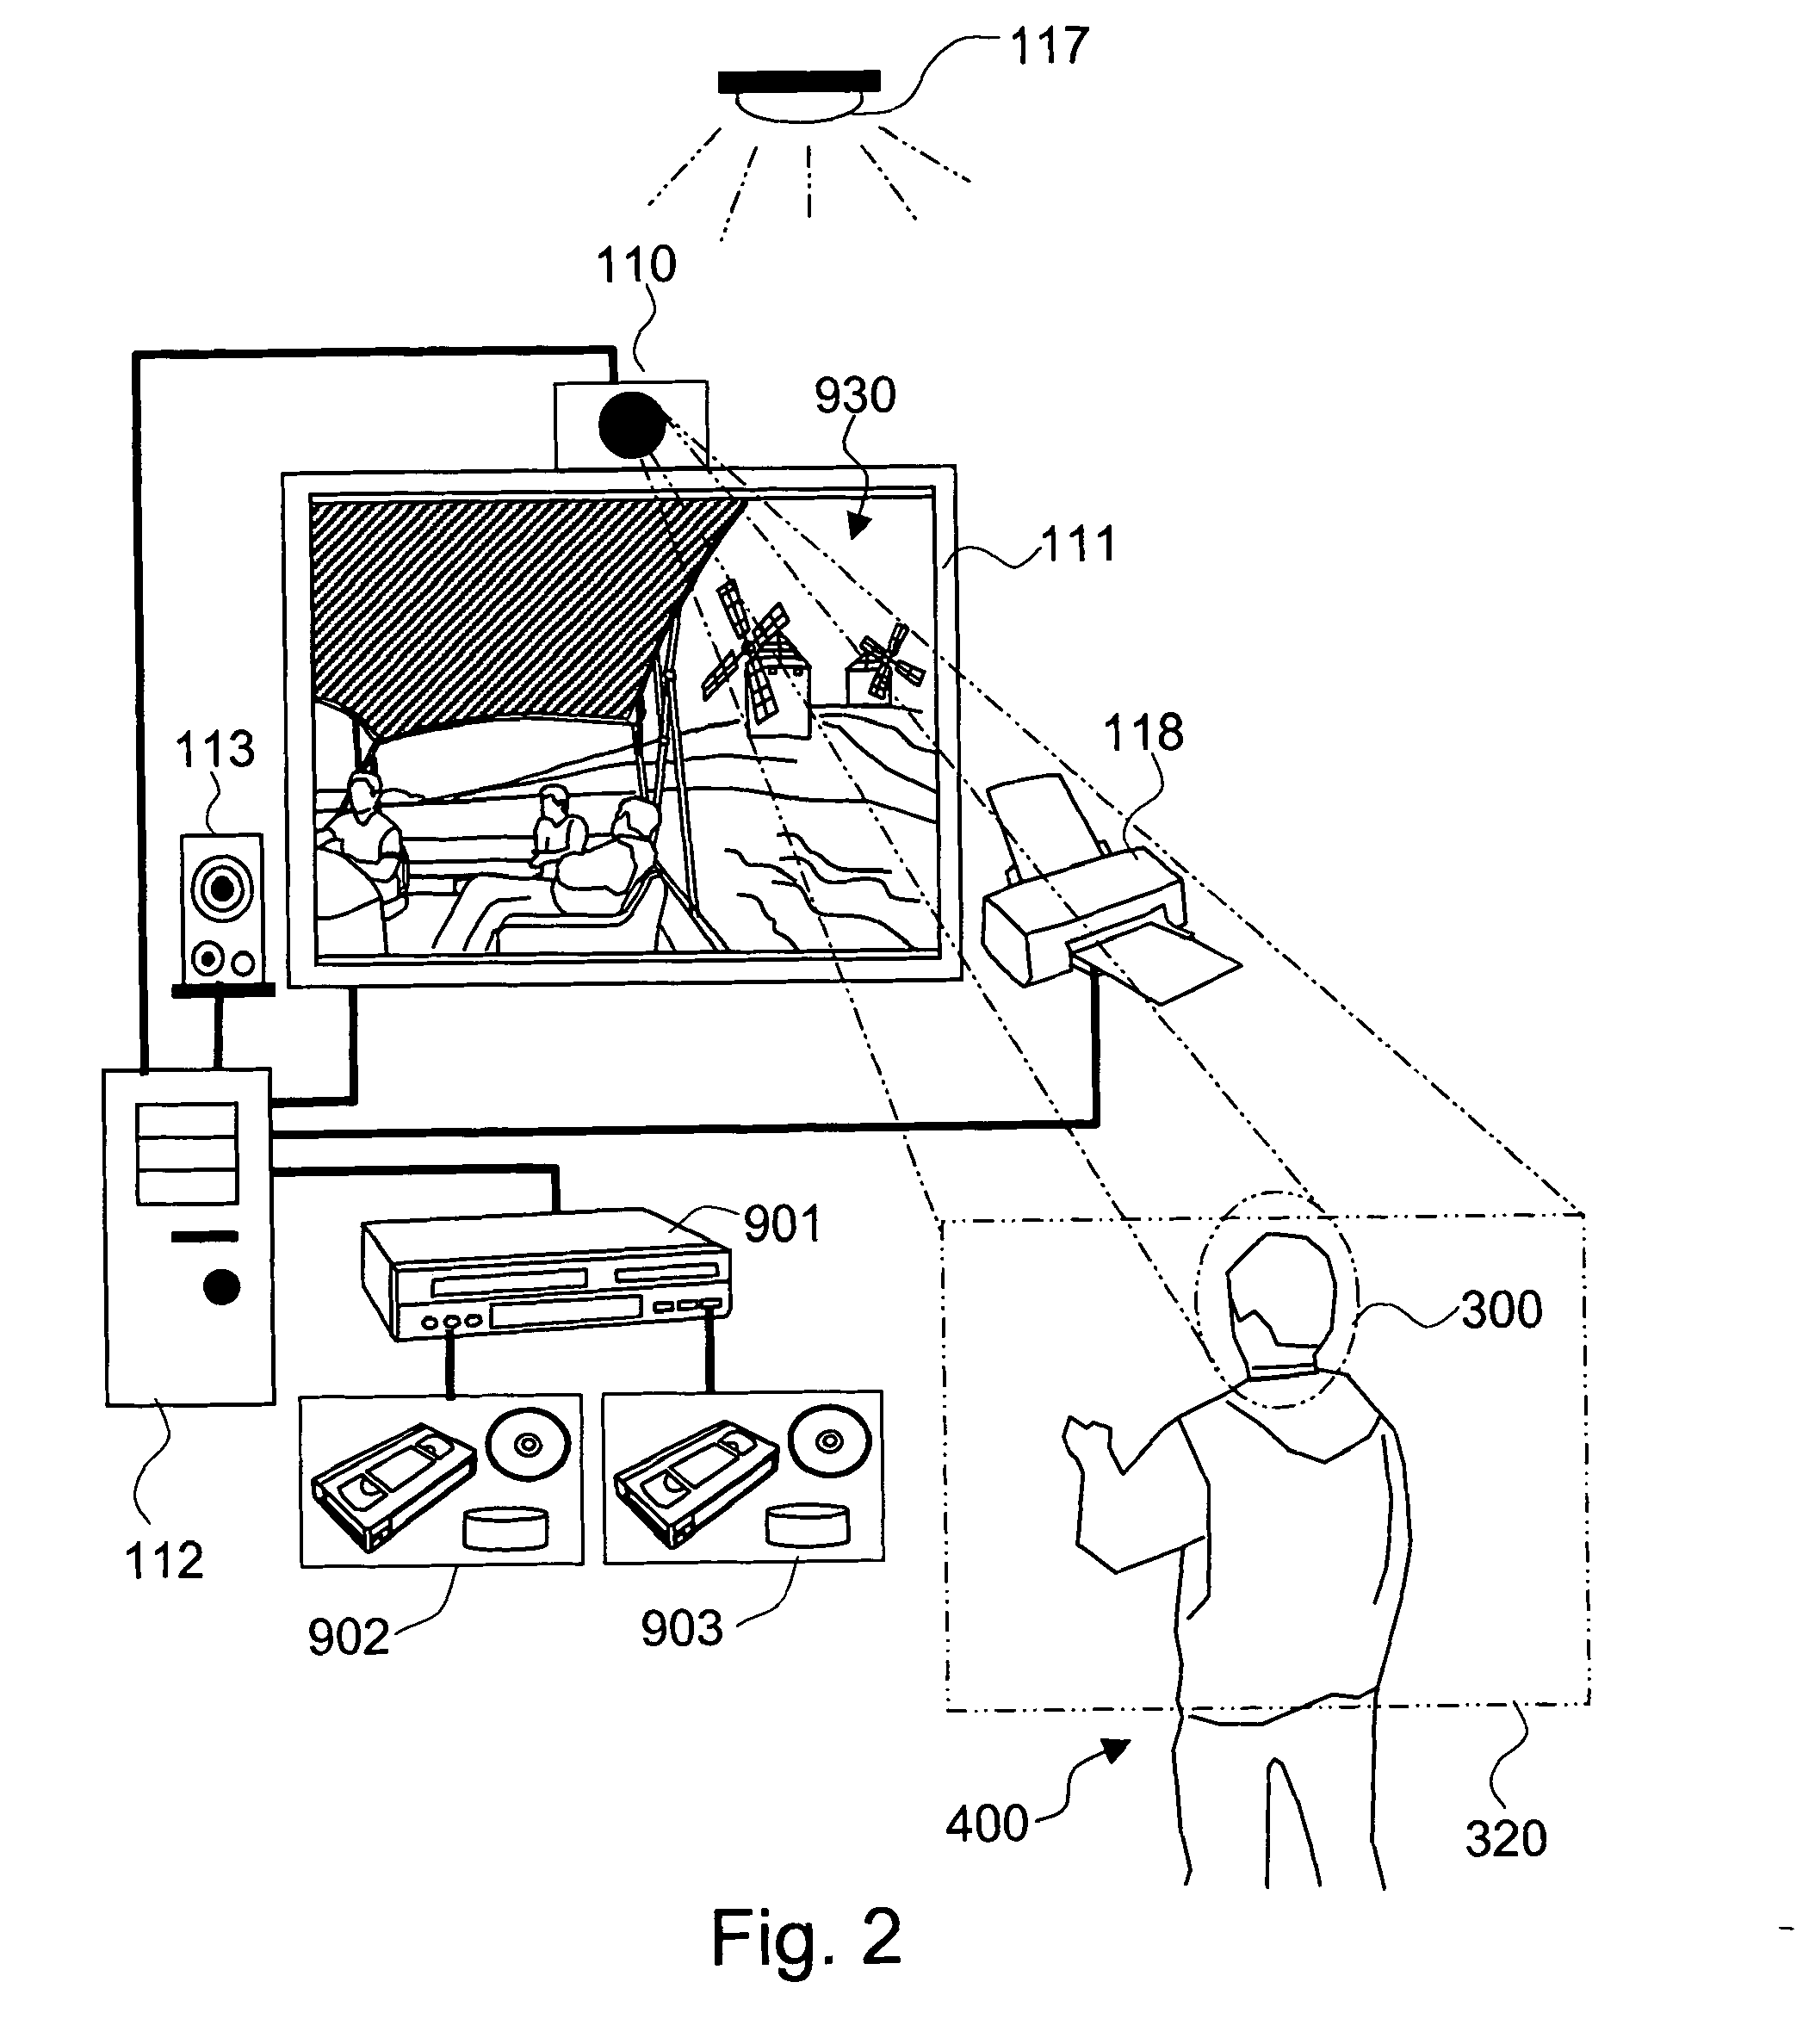 Method and System for Immersing Face Images into a Video Sequence